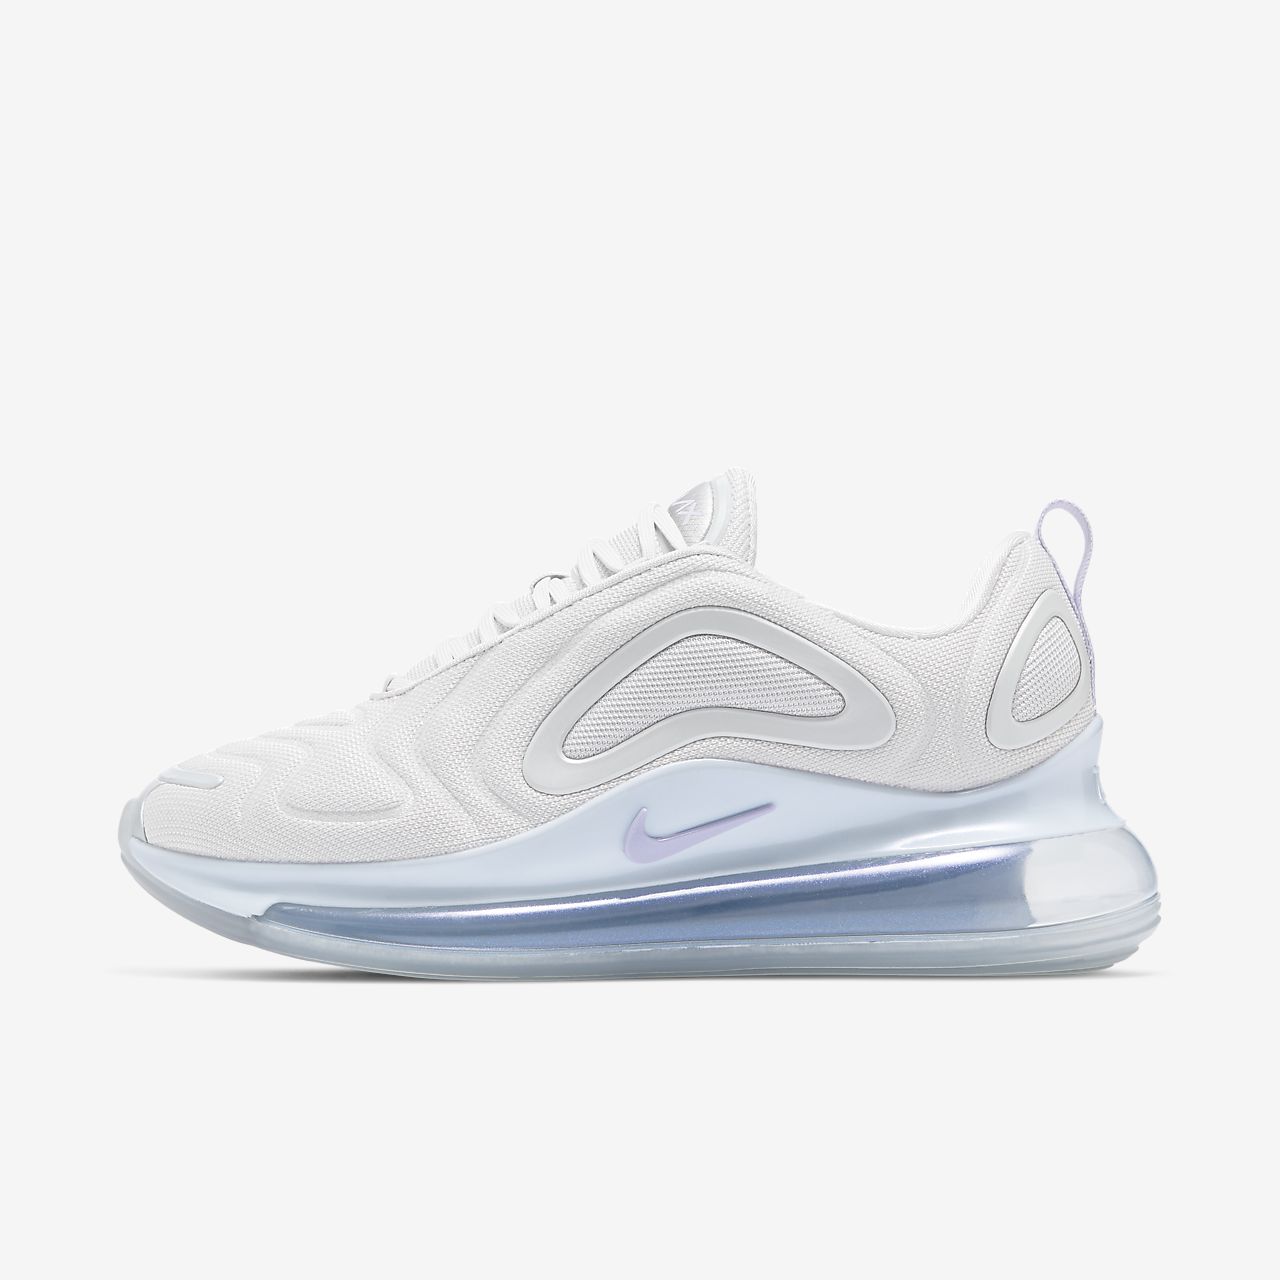 Nike Air Max 720 SE -- 11 sneakers to invest in right now for 2020  -- www.jennysgou.com